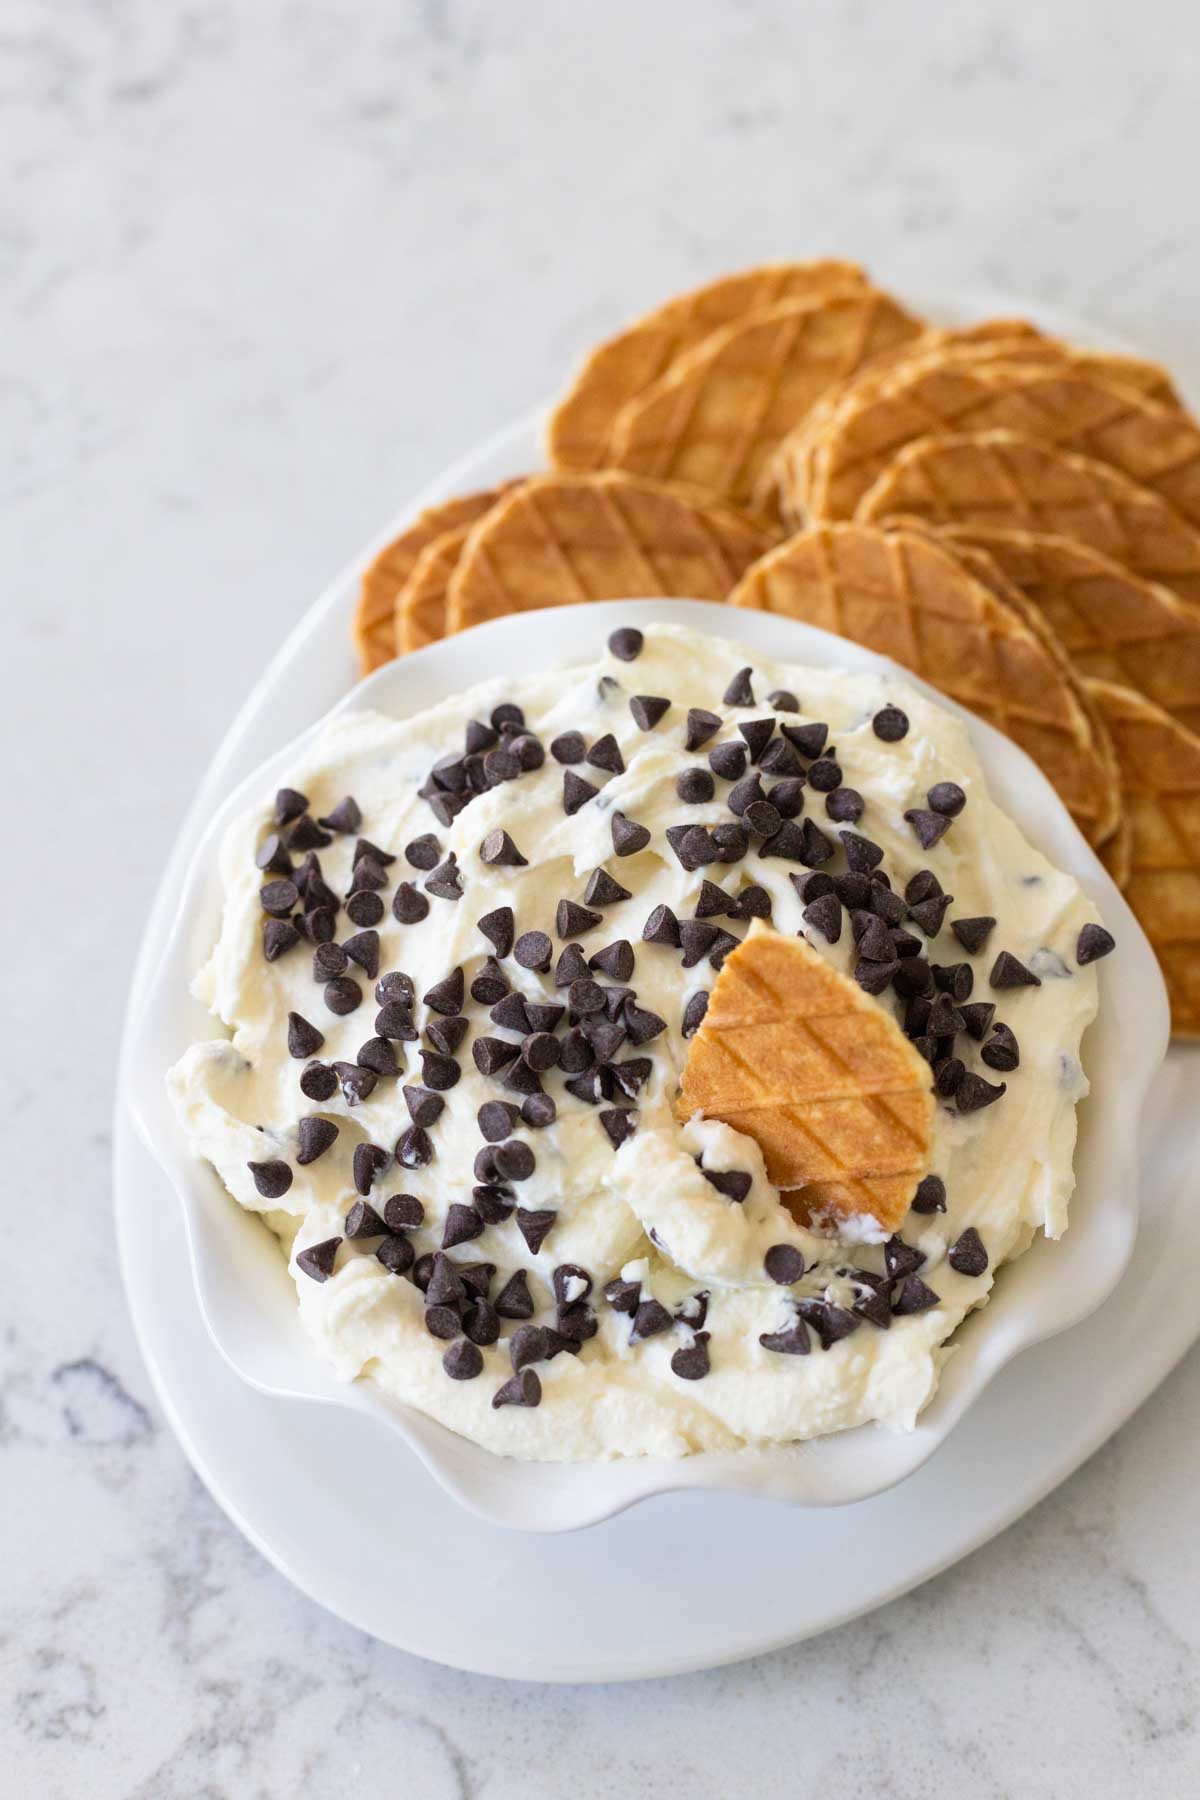 The nut-free cannoli dip has just chocolate chips on top.